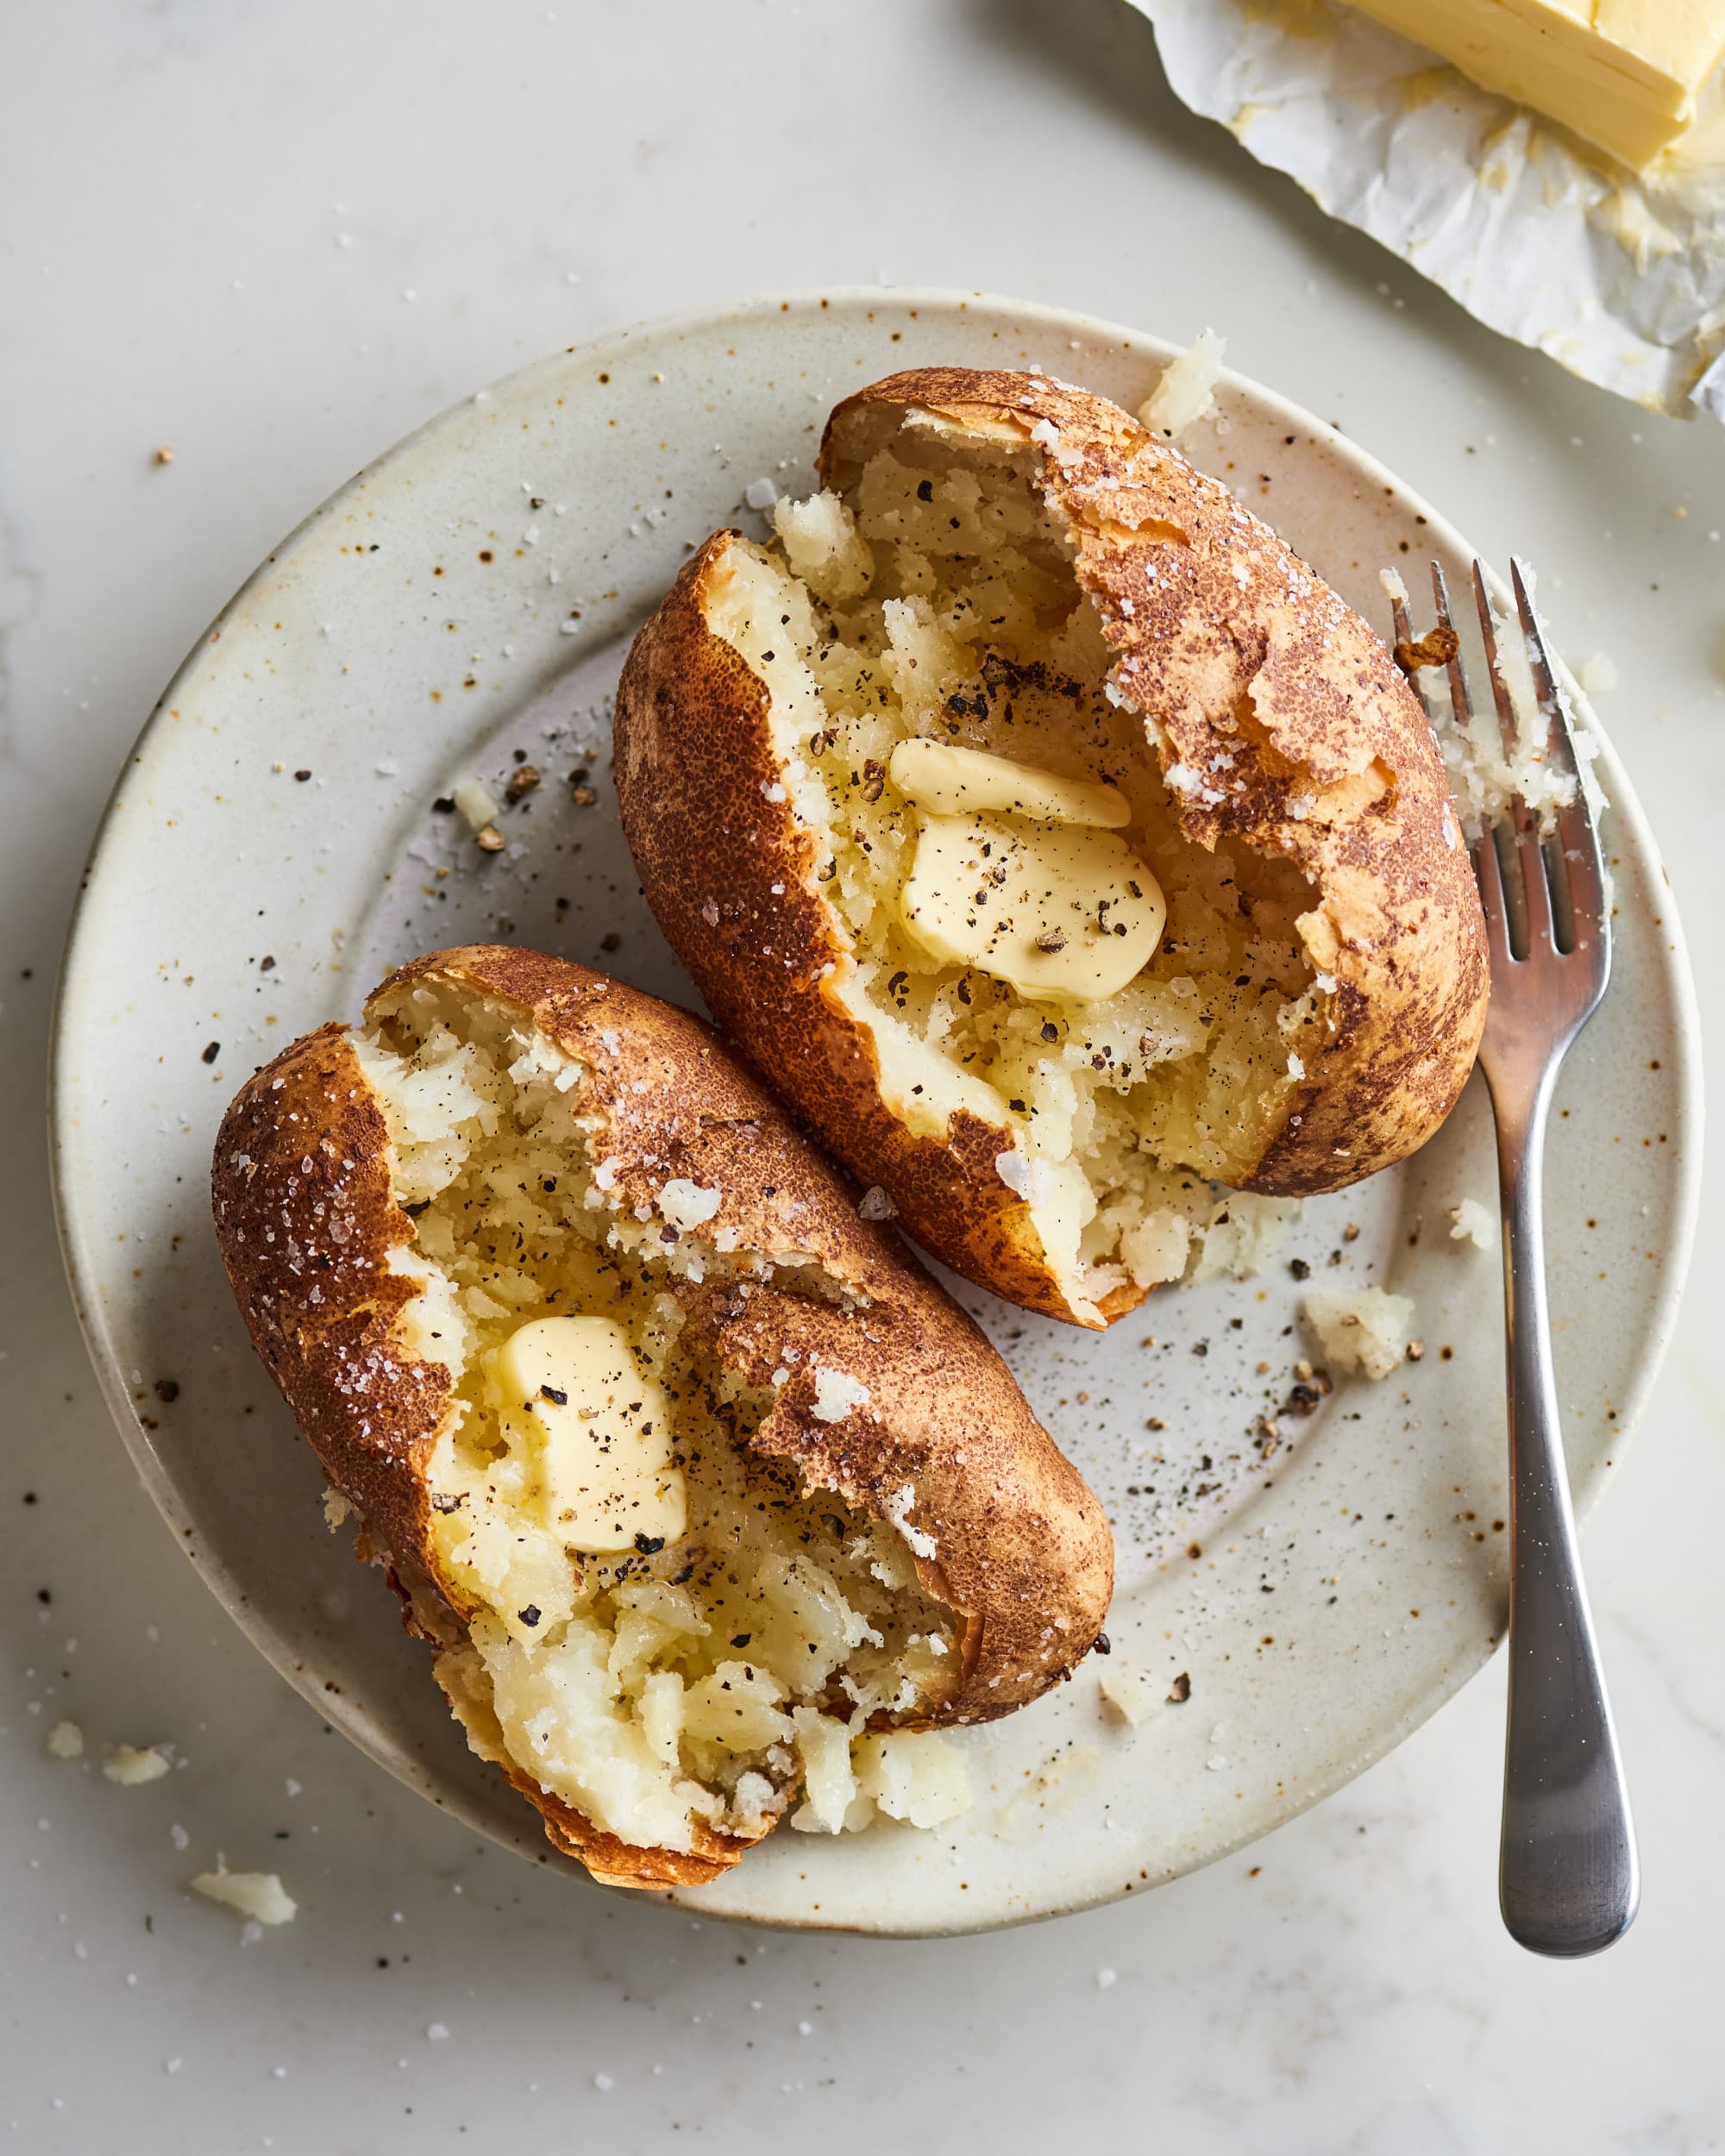 How to Bake a Potato: The Very Best Recipe | Kitchn